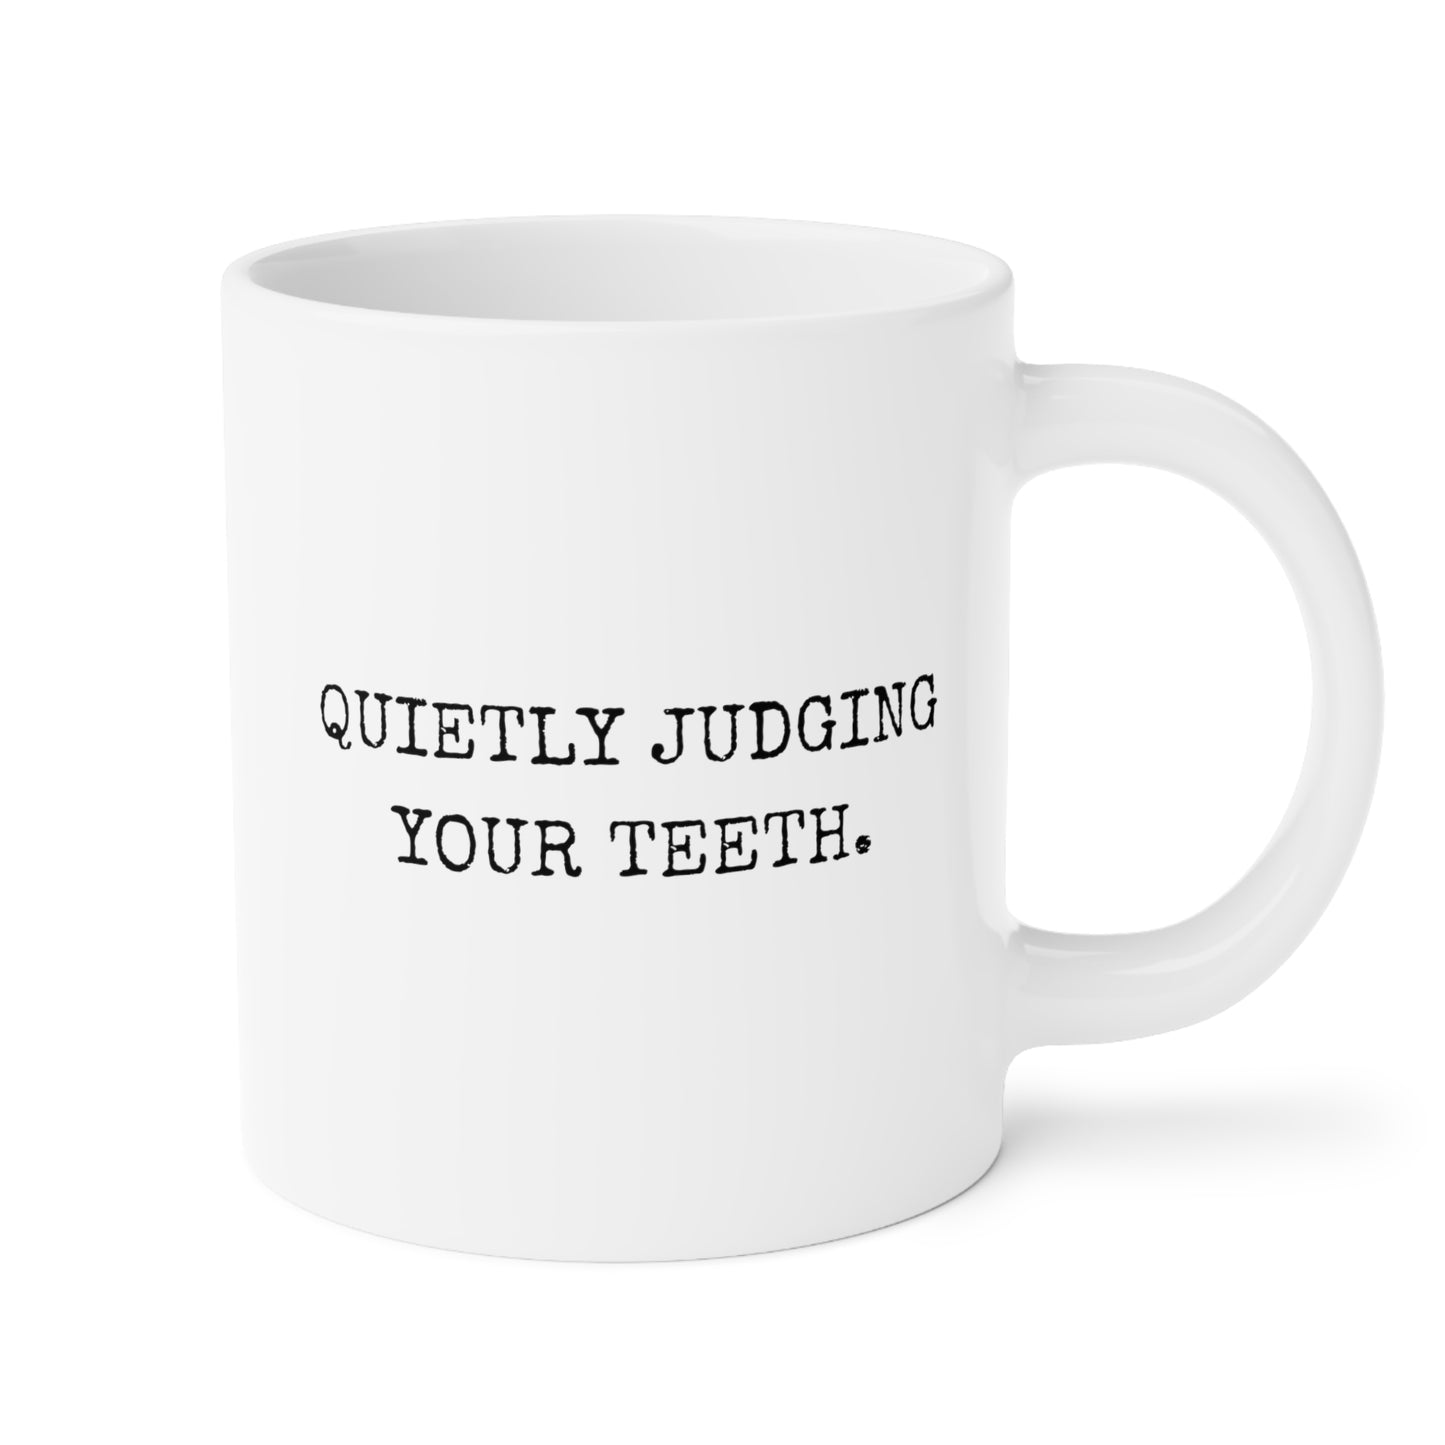 Quietly Judging Your Teeth 20oz white funny large coffee mug gift for dentist dental school graduation assistant orthodontist oral hygienist waveywares wavey wares wavywares wavy wares